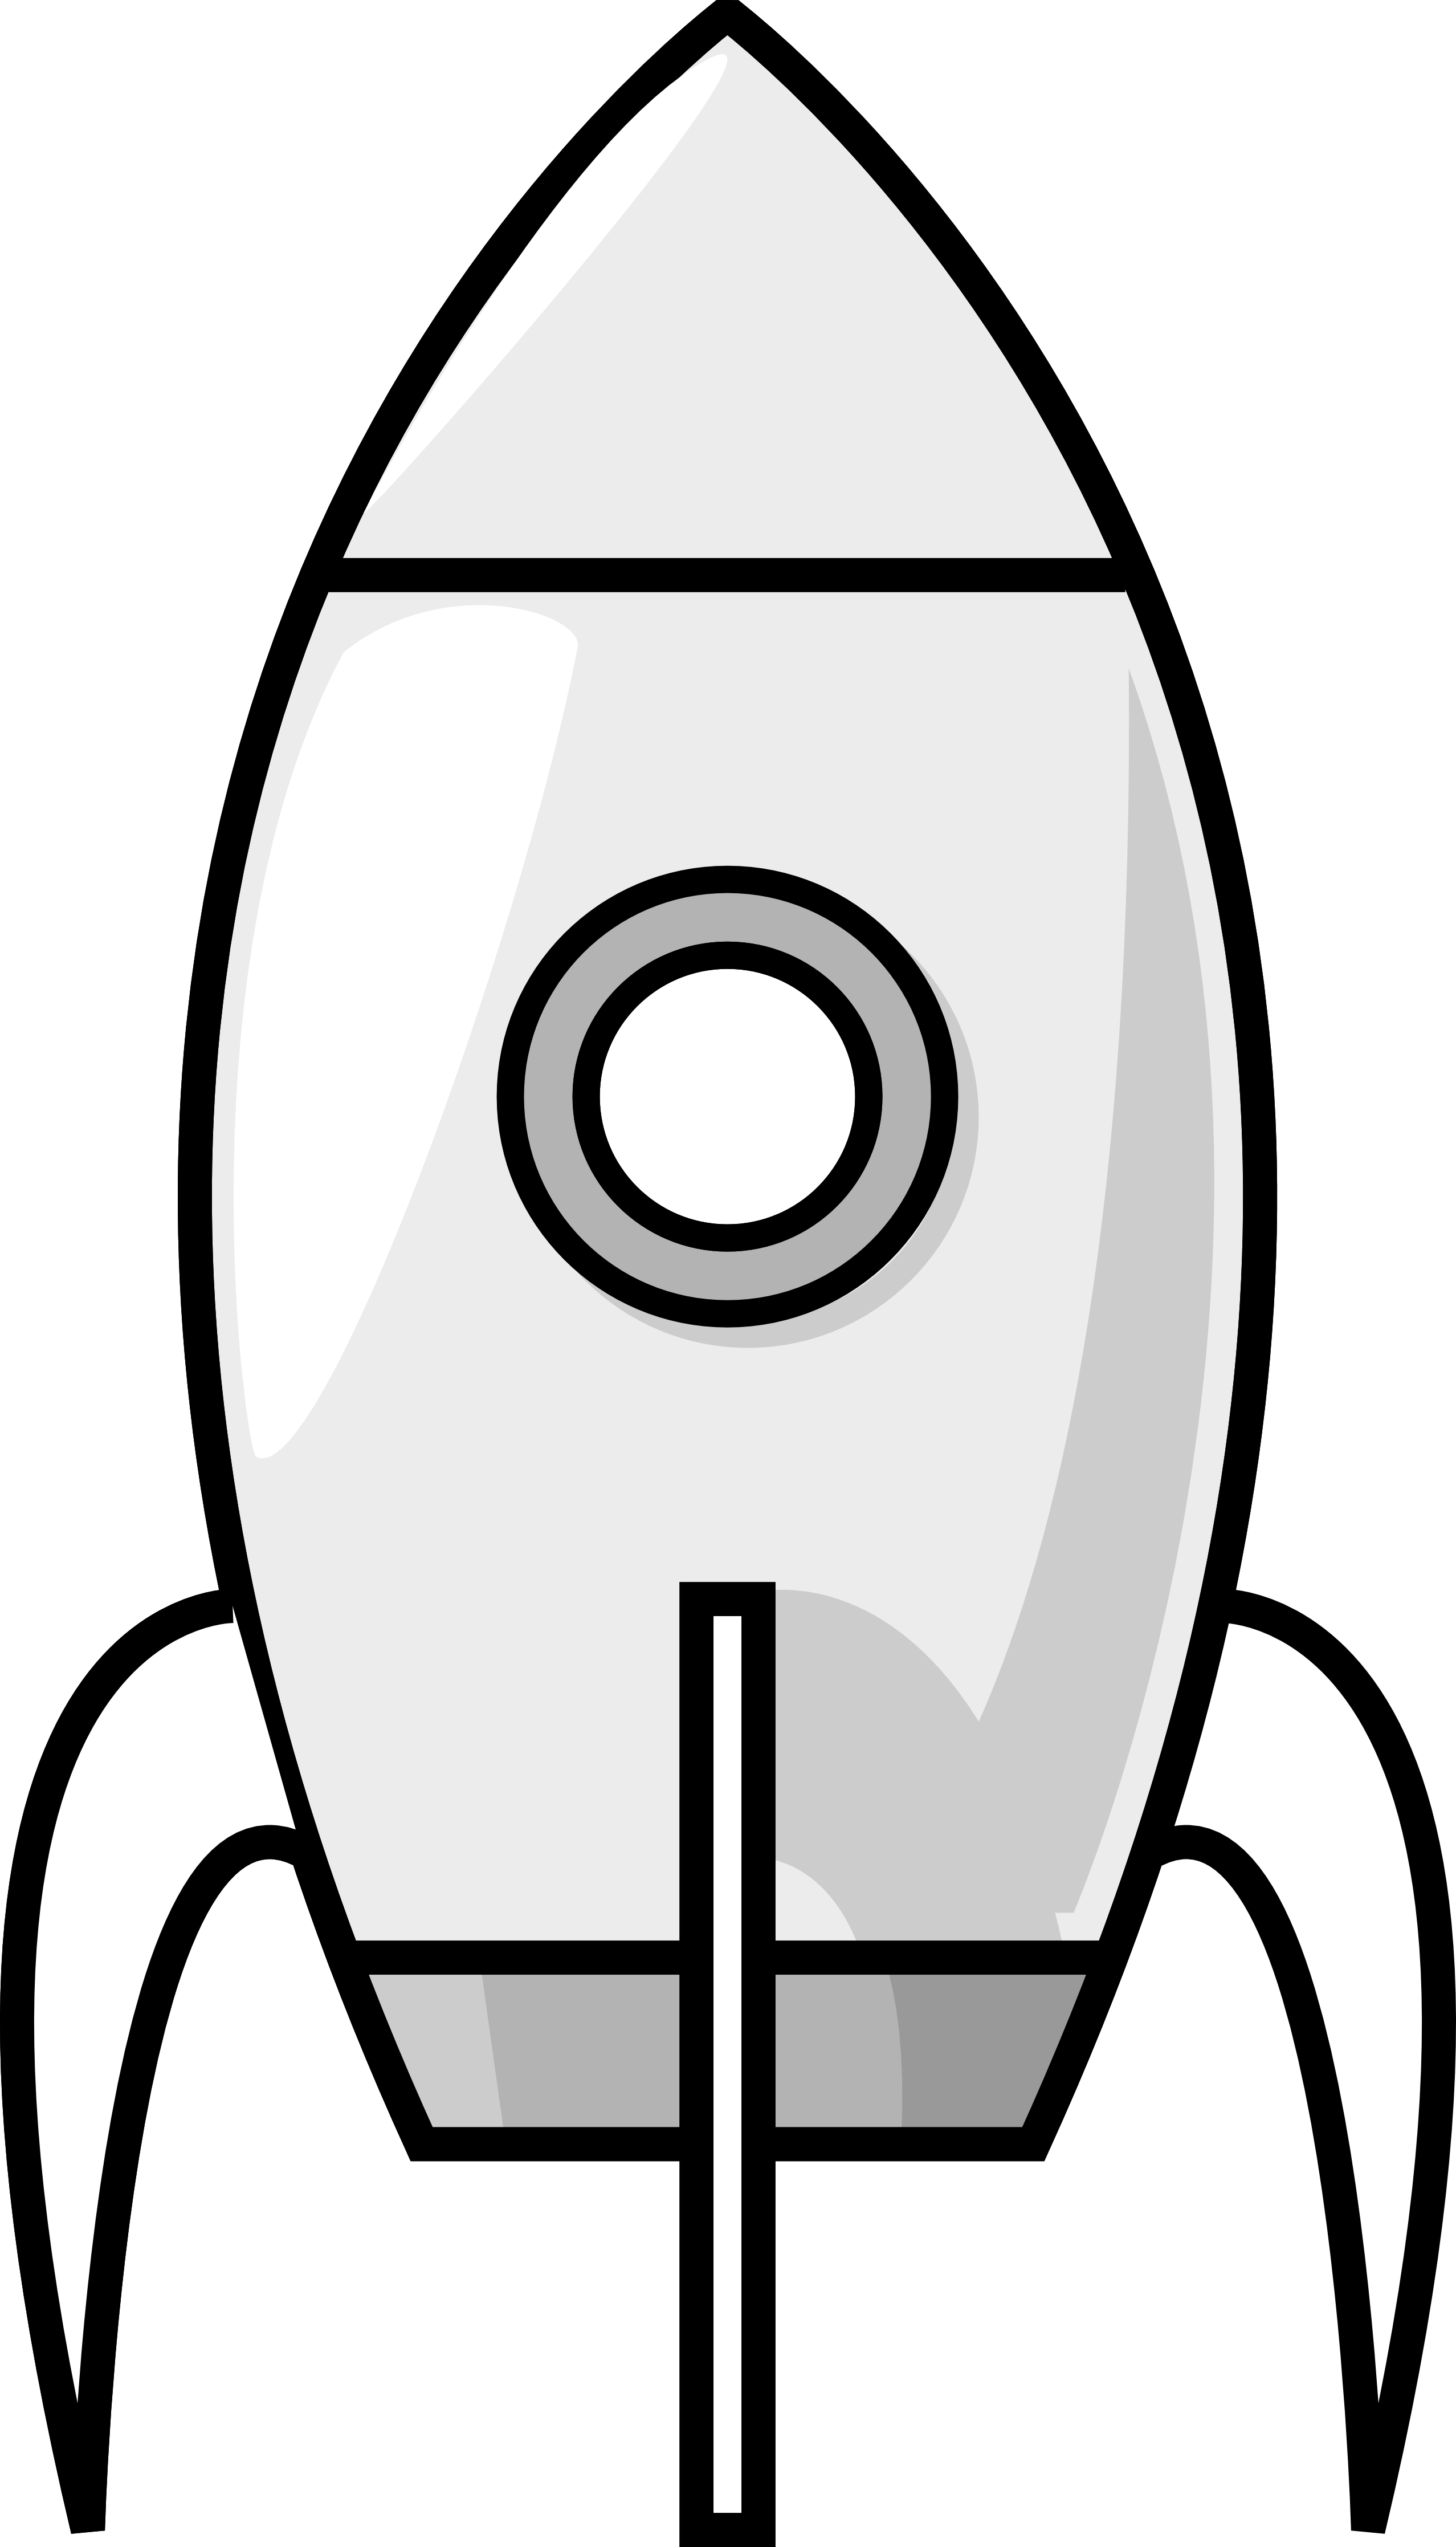 Rocket Clipart Black And White | Clipart library - Free Clipart Images